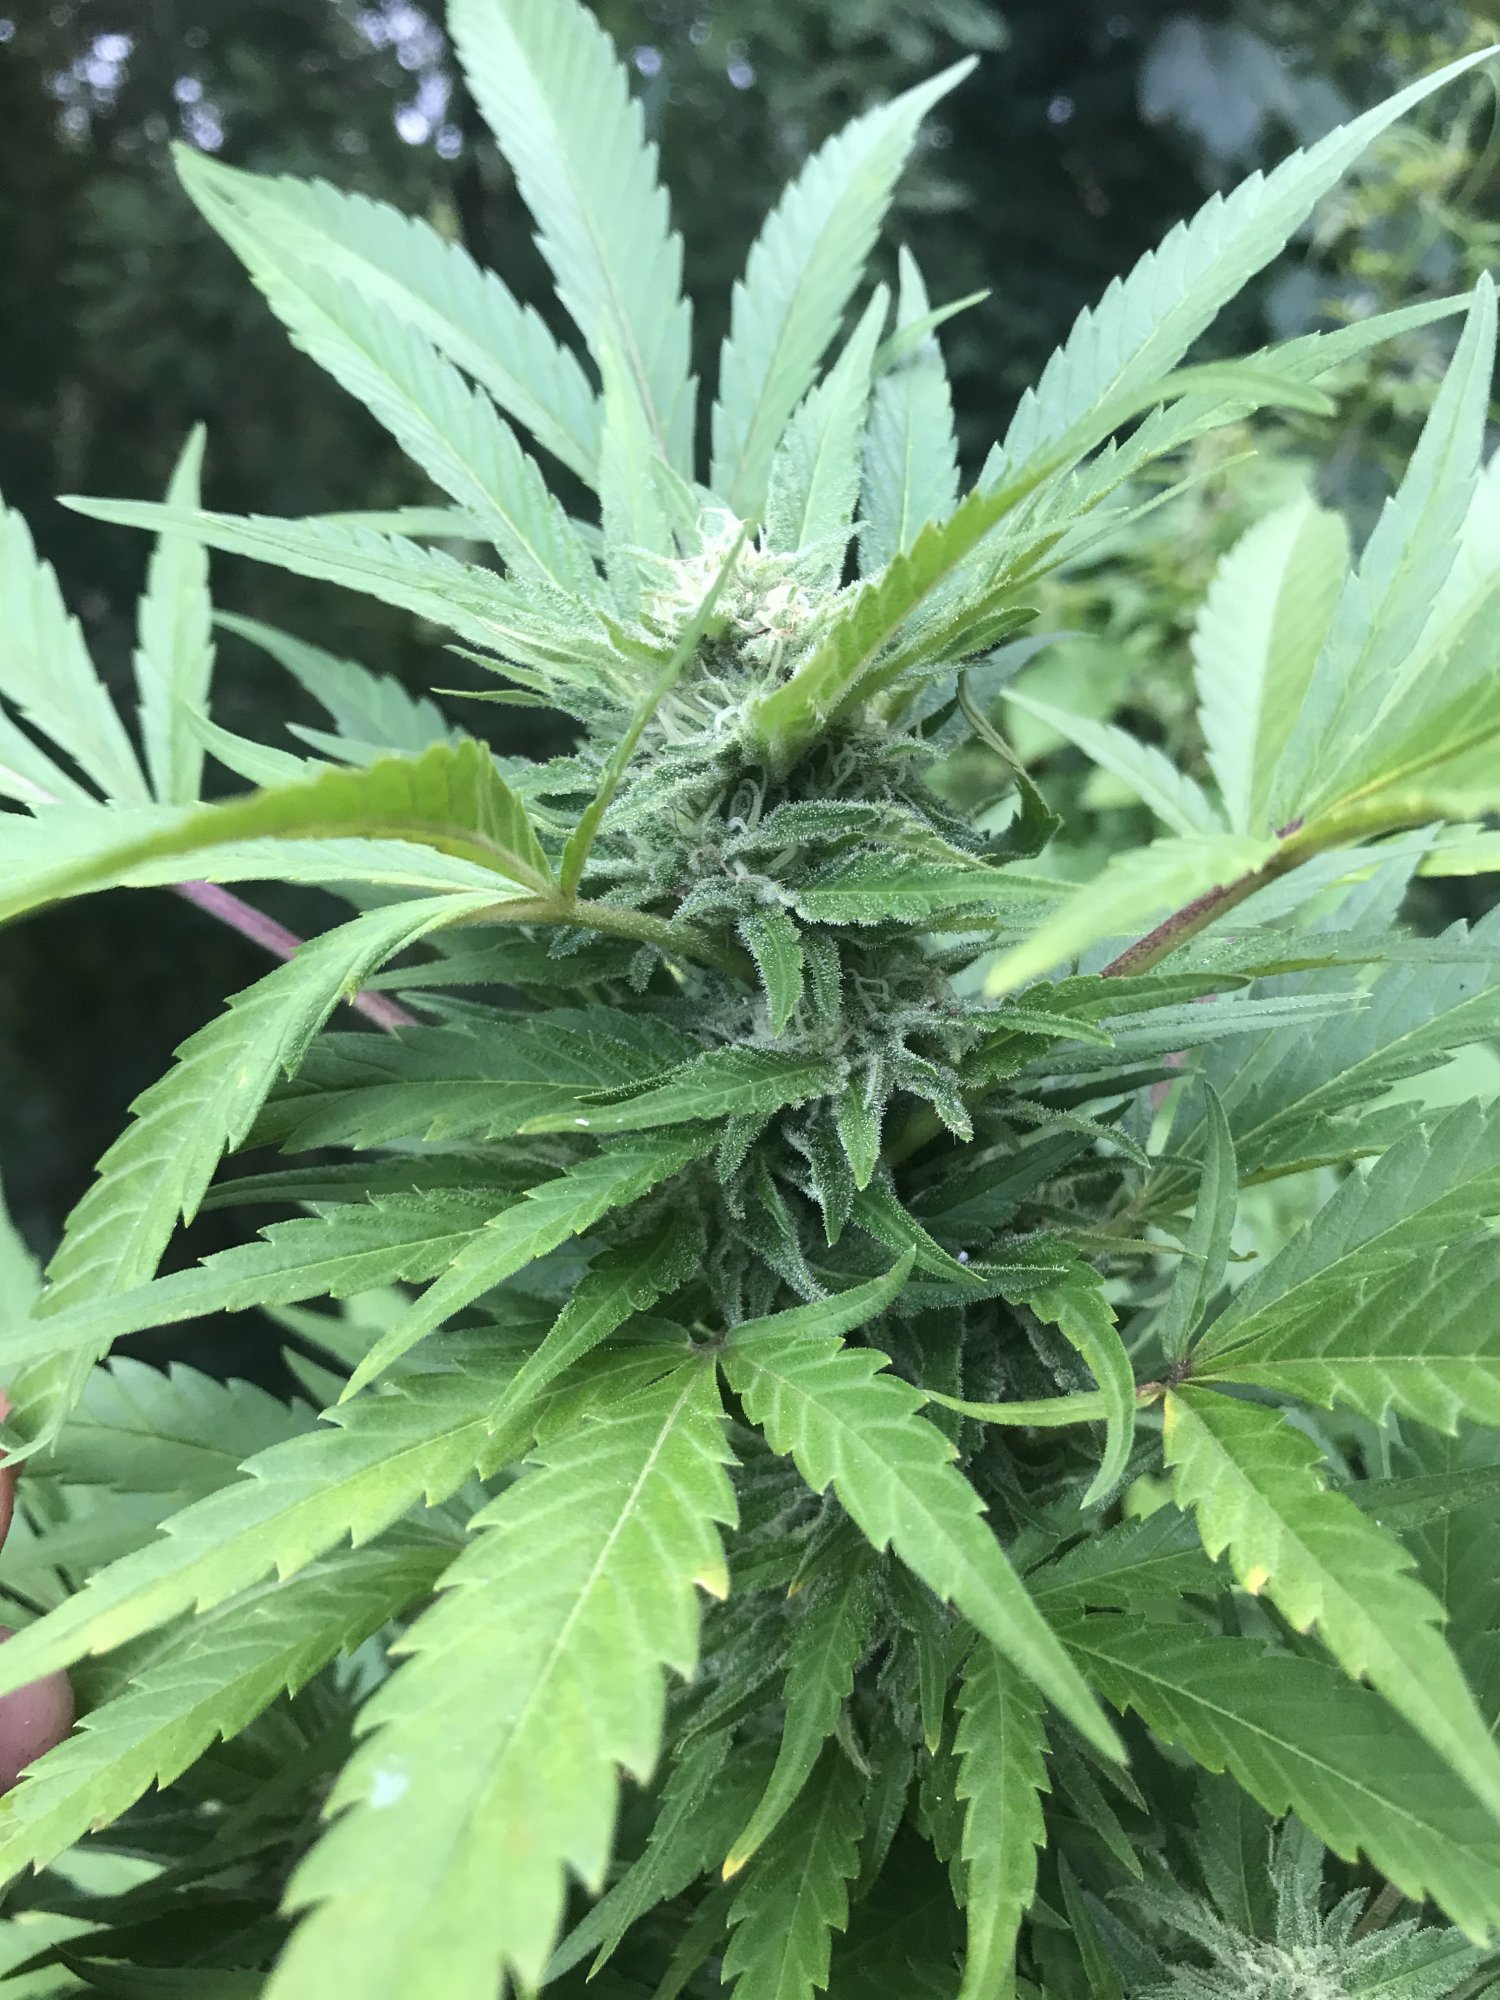 Leaves are yellowing close to harvest 4